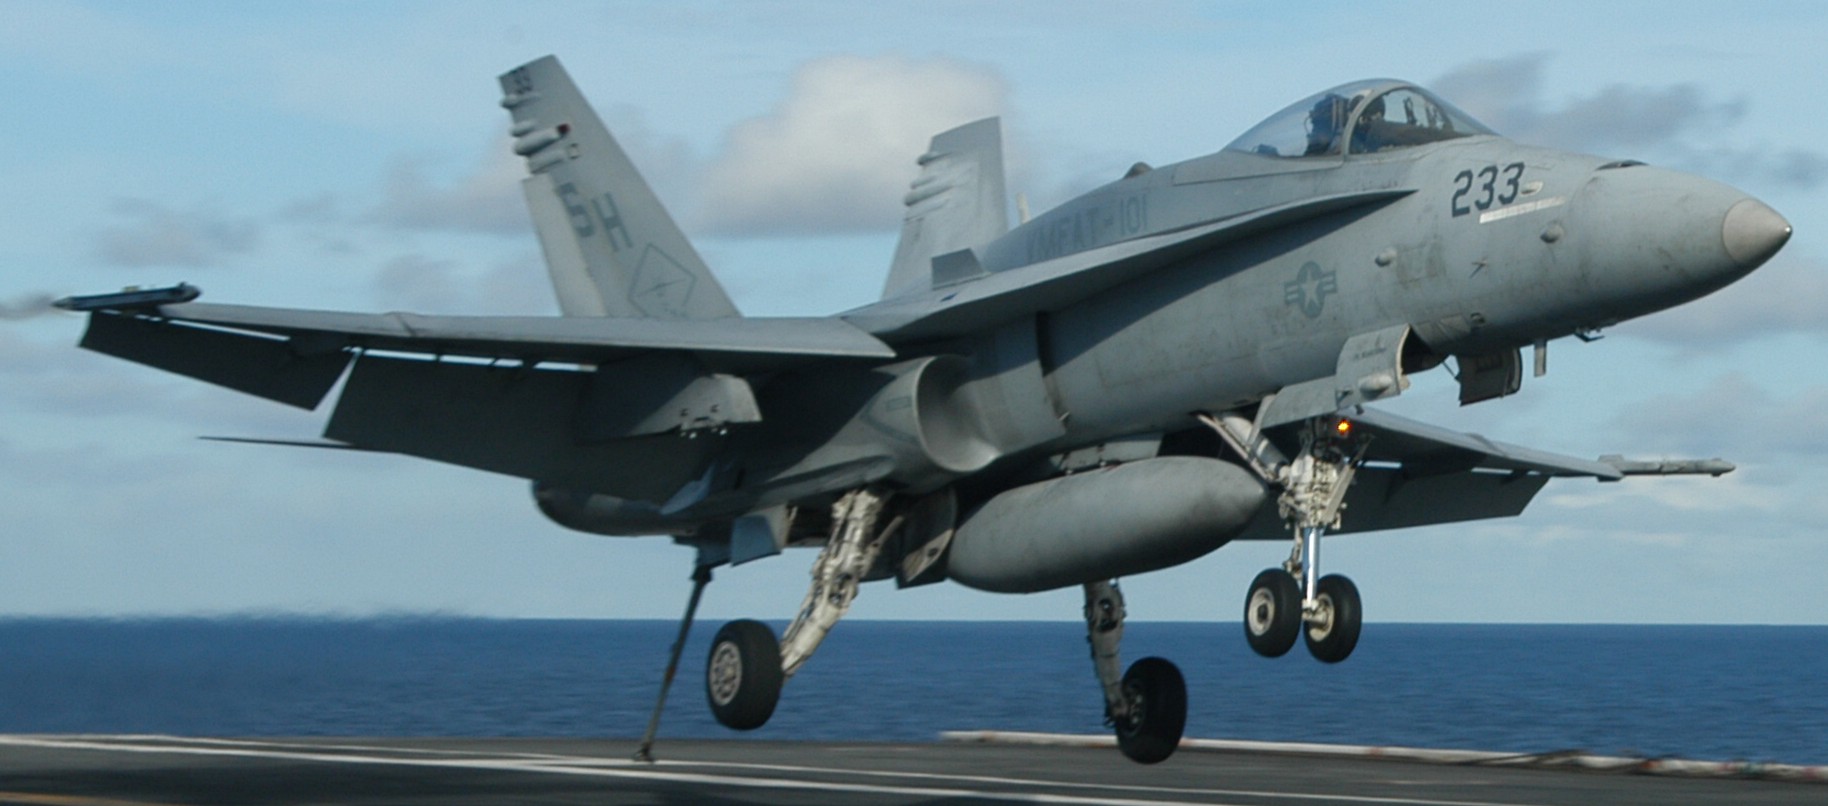 vmfat-101 sharpshooters marine fighter attack training squadron f/a-18c hornet cvn-71 uss theodore roosevelt 106